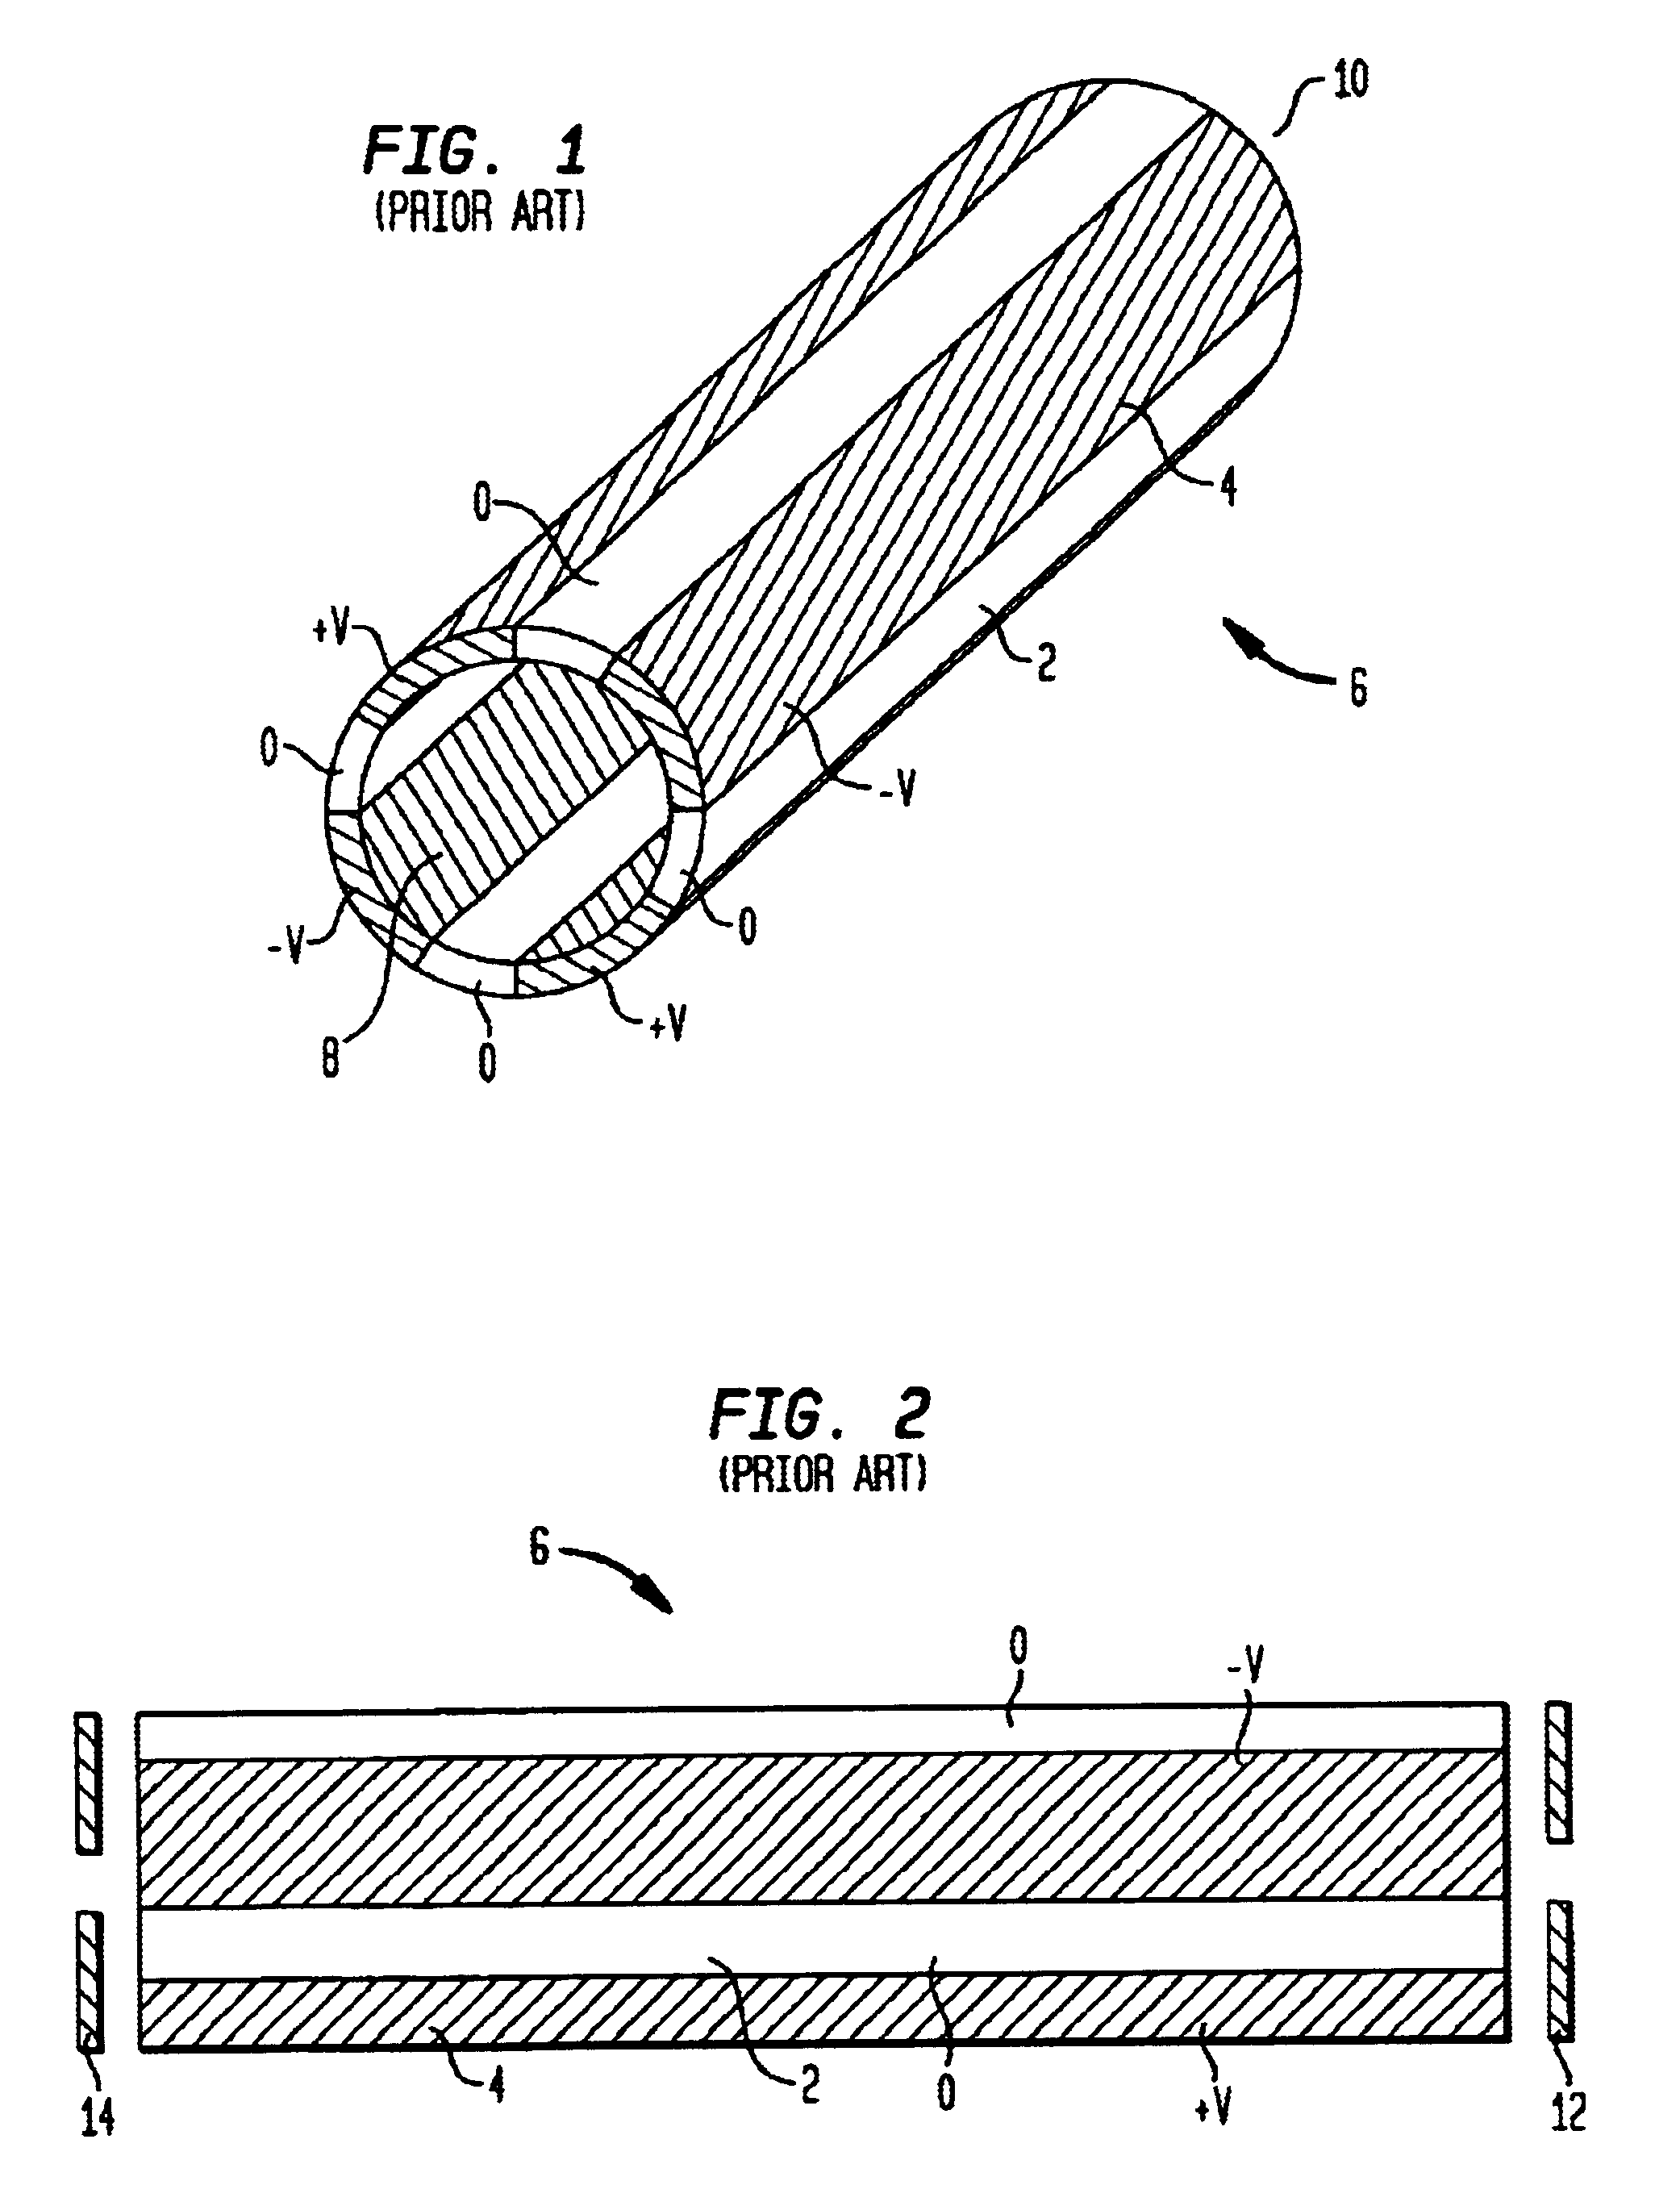 Method and apparatus for fourier transform mass spectrometry (FTMS) in a linear multipole ion trap